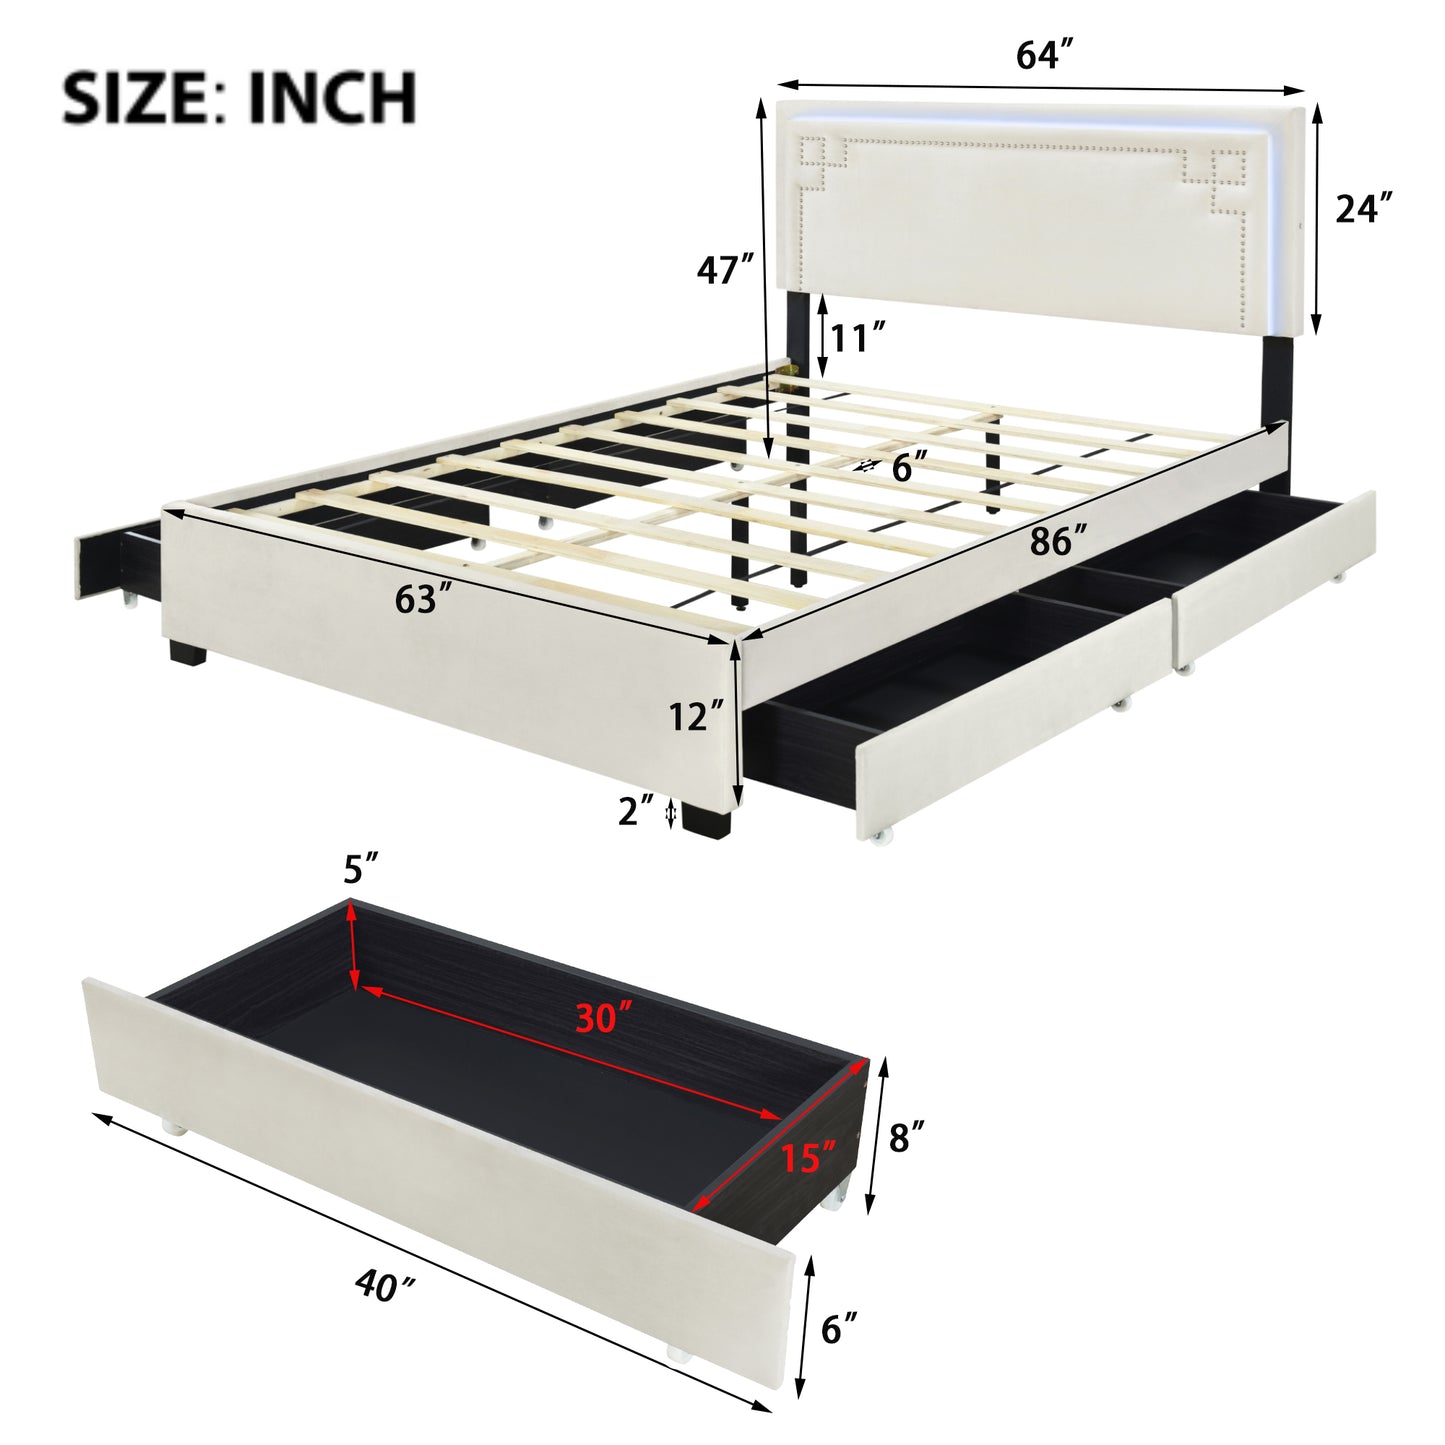 Queen Size Upholstered Platform Bed with Rivet-decorated Headboard, LED bed frame and 4 Drawers, Beige